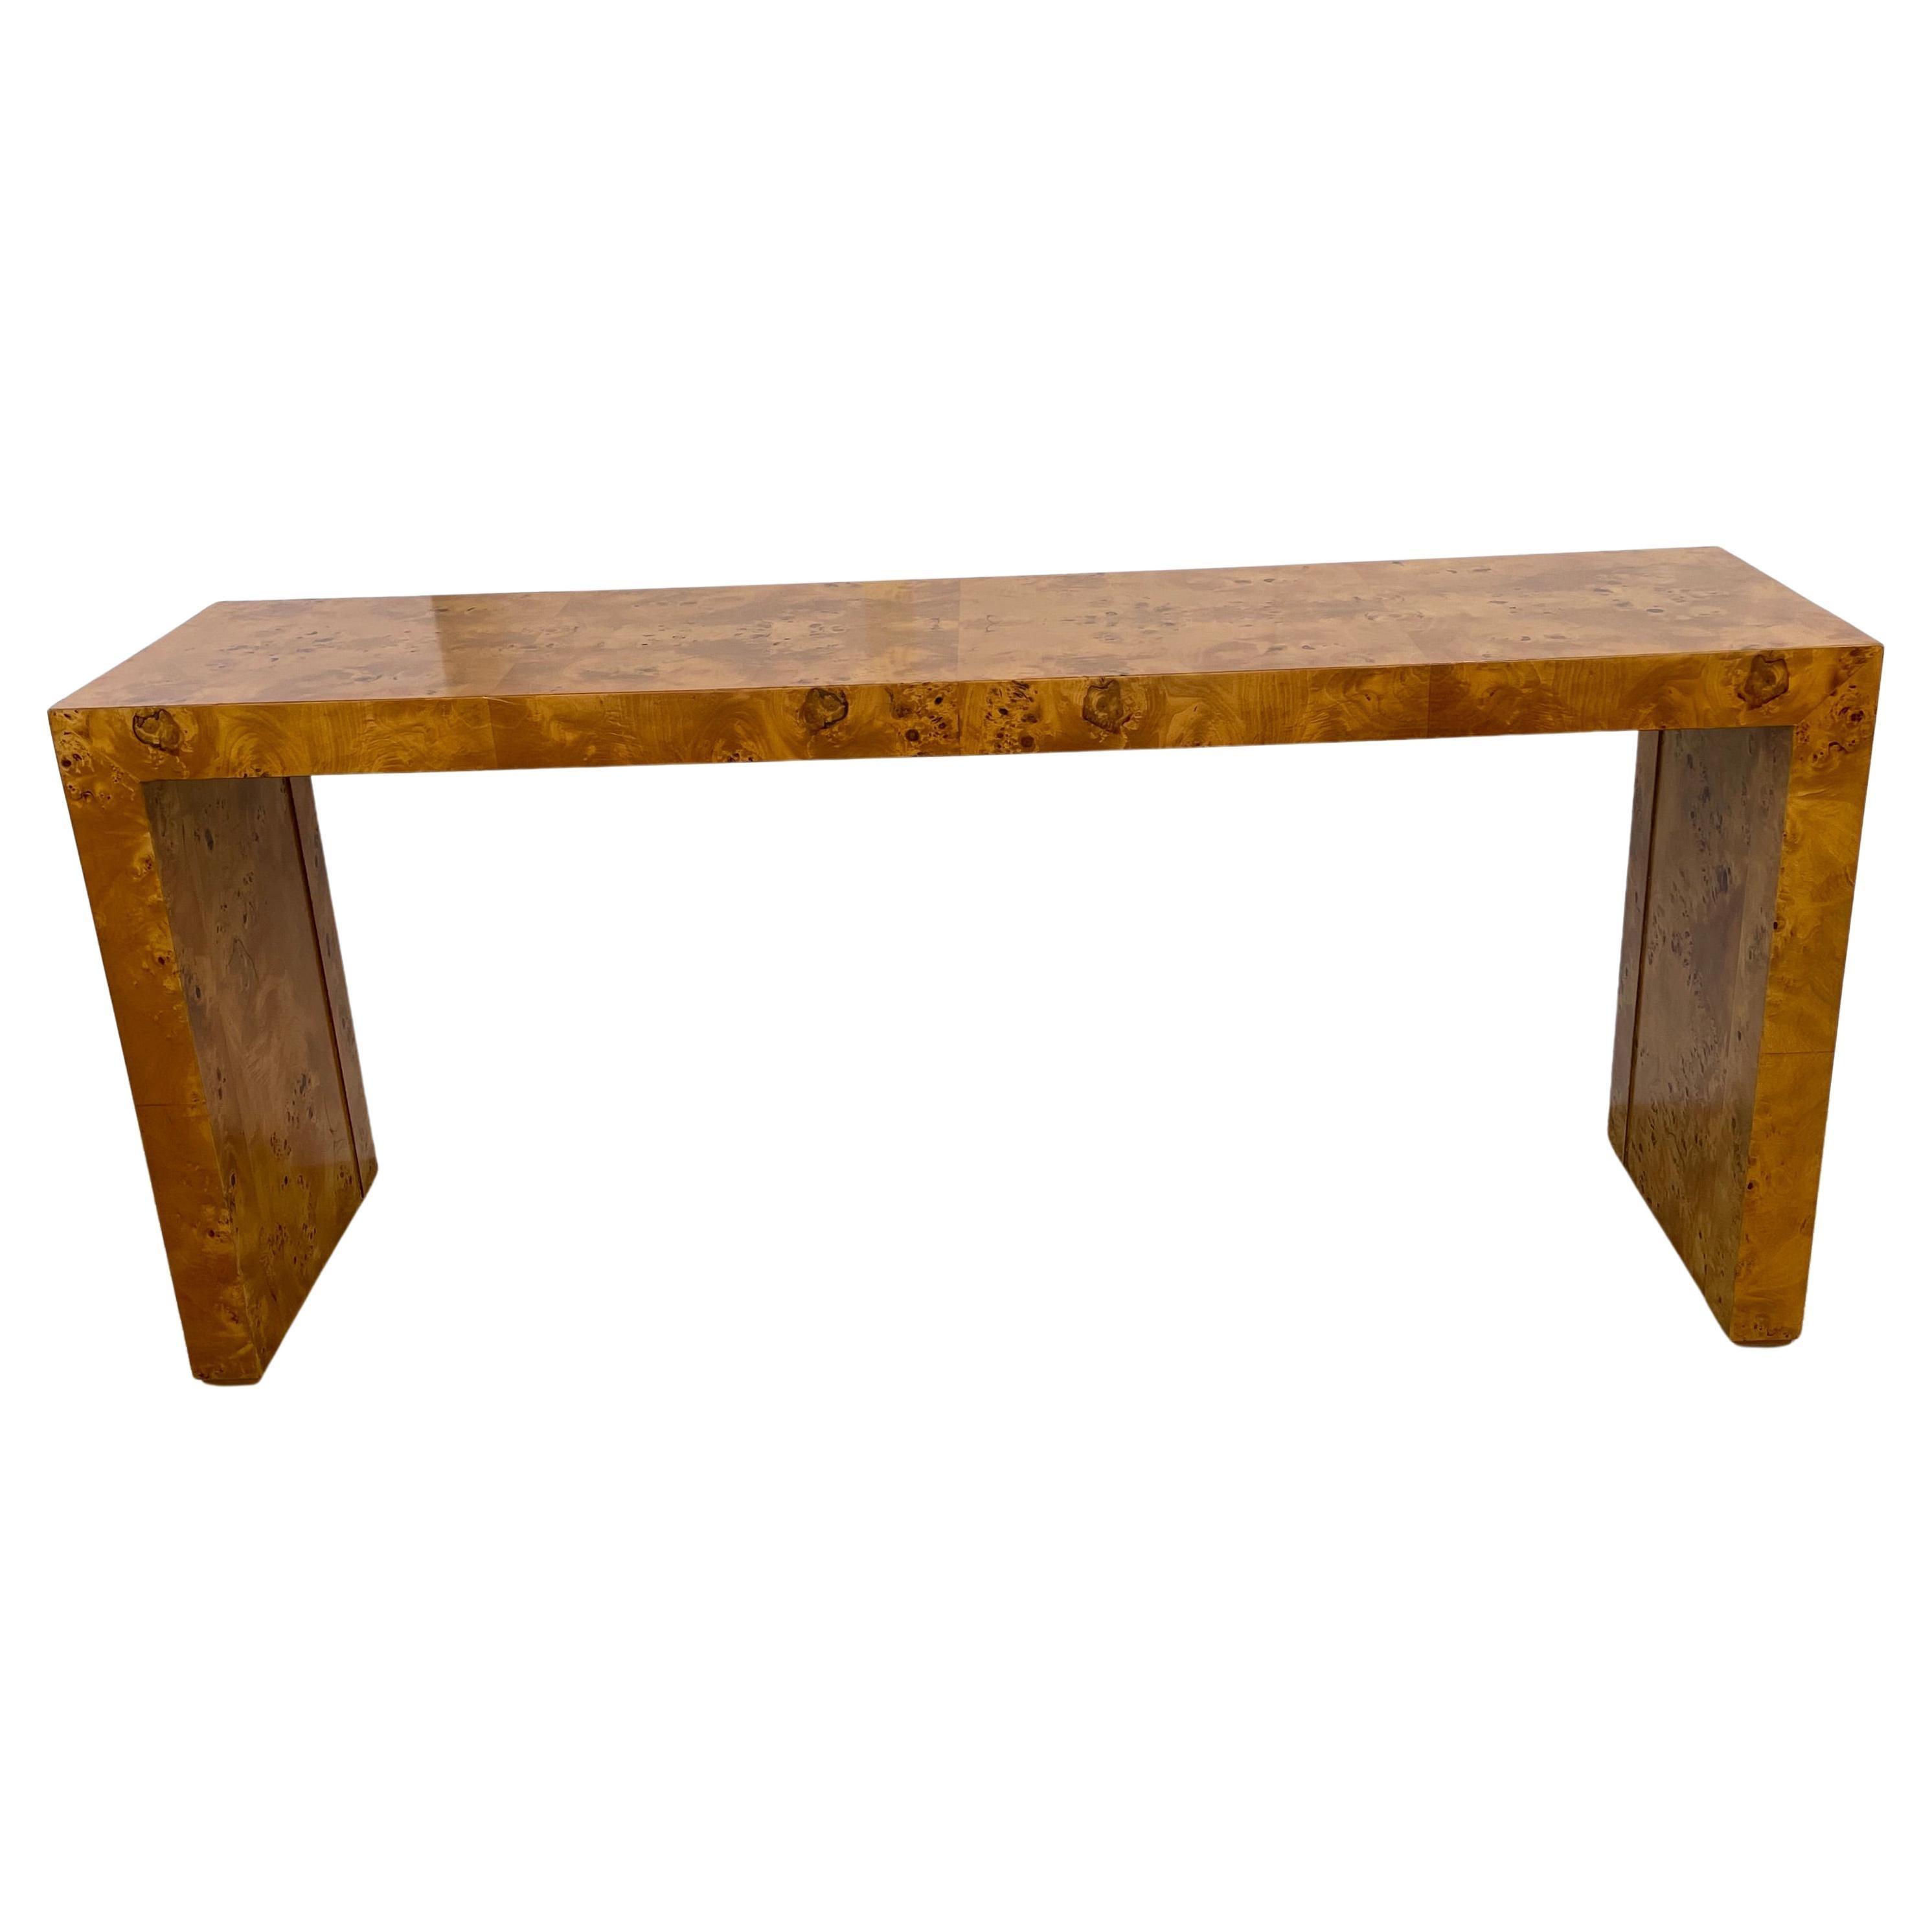 This stylish and chic burlwood console table dates to the 1970s and was created by Hekman for their Wind Row Collection. The piece has clean lines and a nice detail on the enside legs with a raised section (see images).

Note: The piece has been